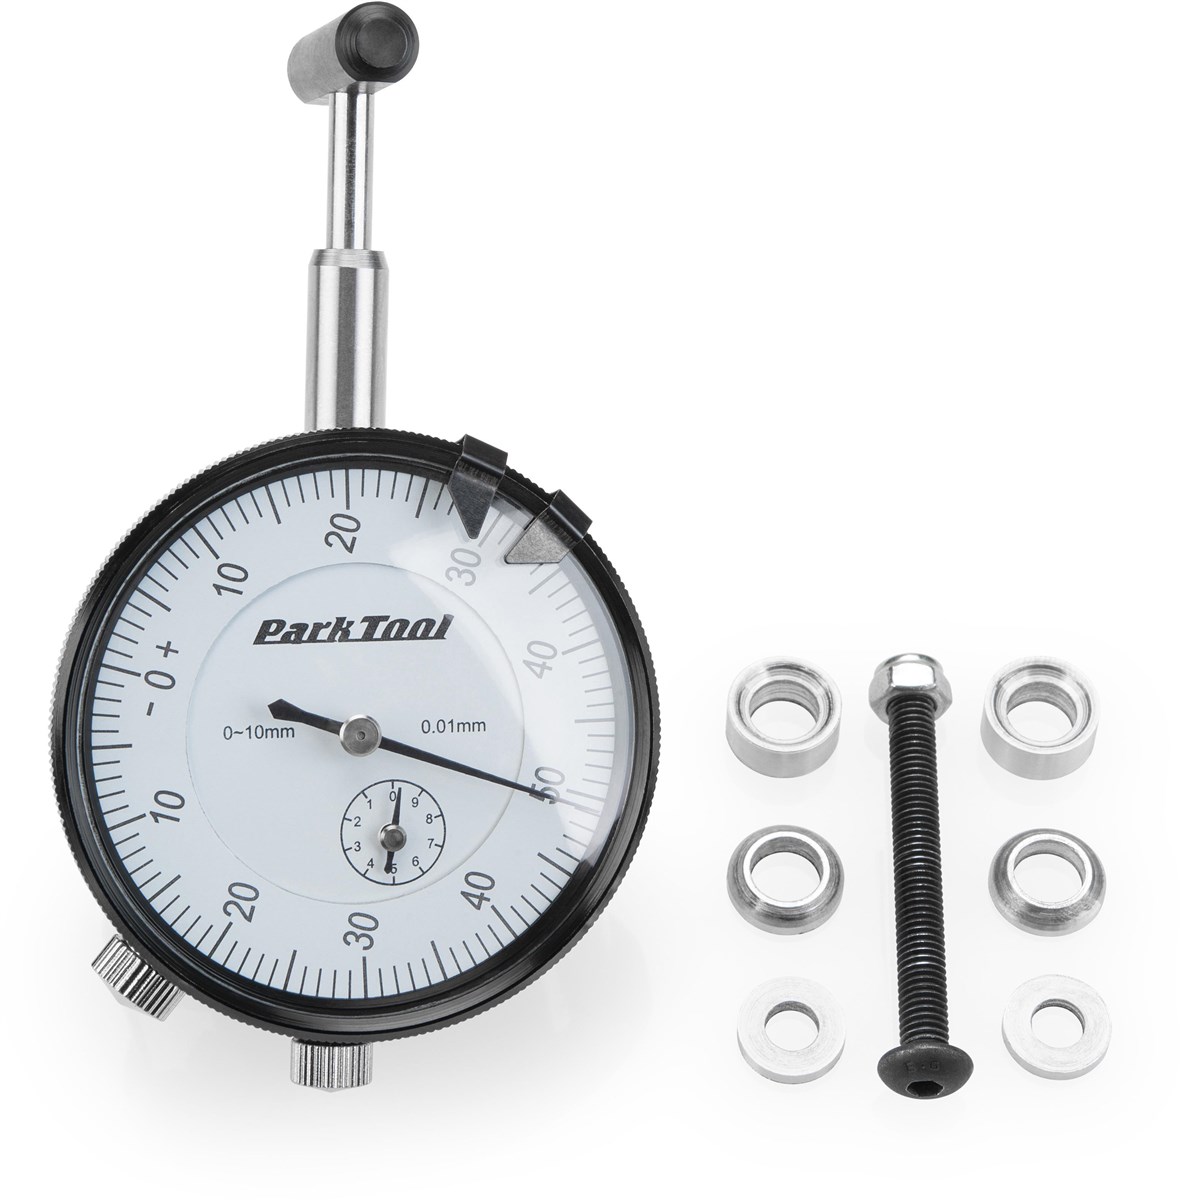 Park Tool DT-3i.2 - Dial Indicator Kit product image